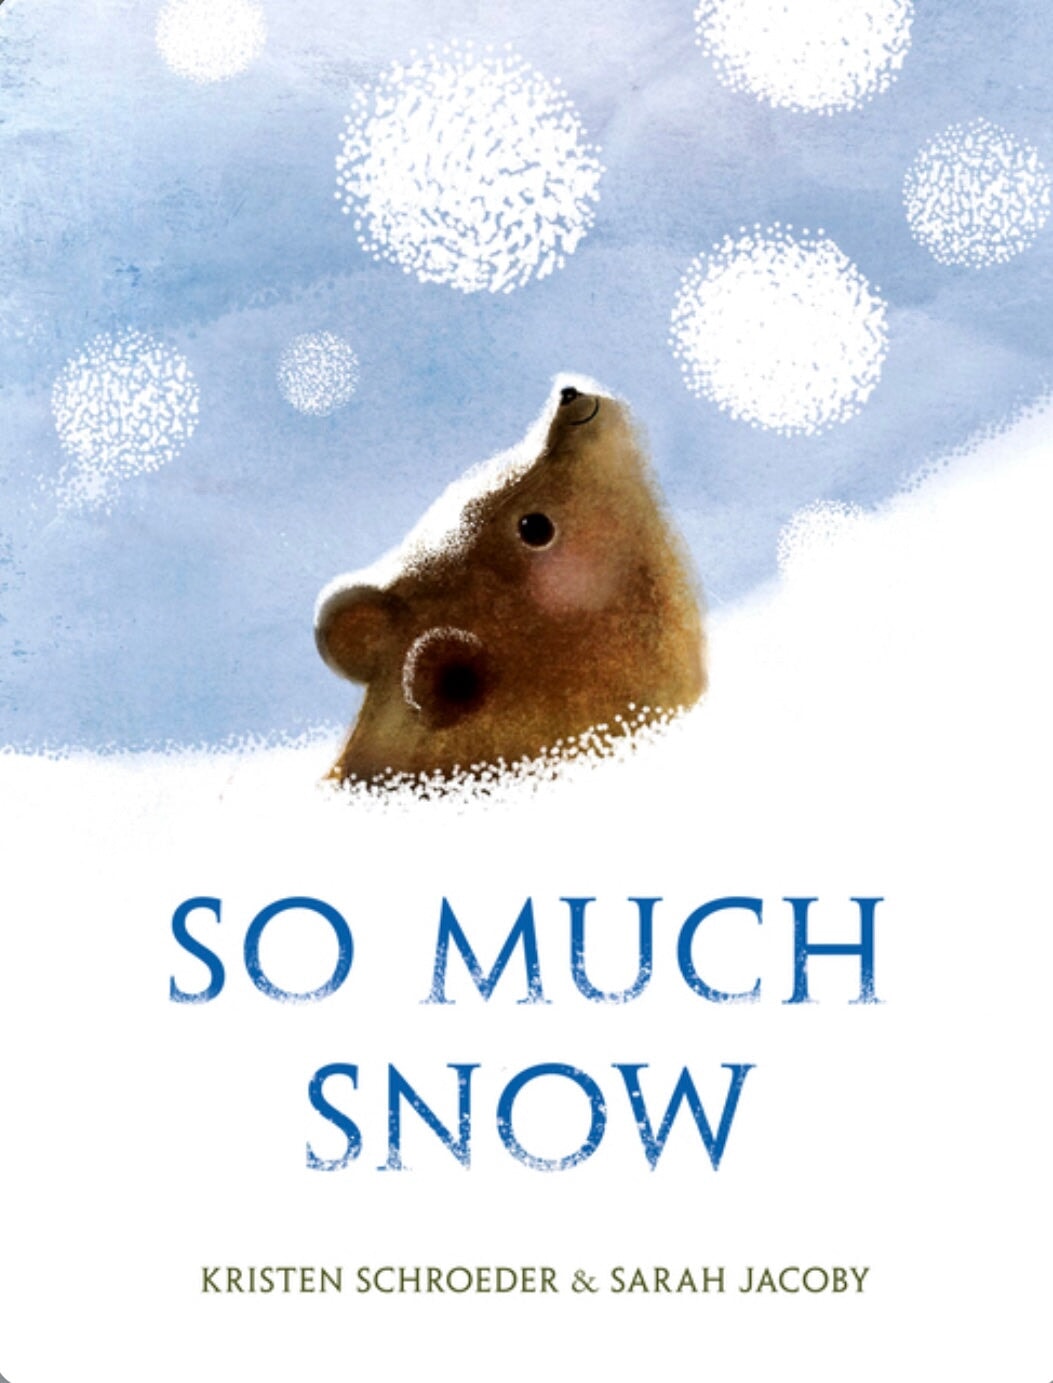 So Much Snow - A Book About The Transition of Winter to Spring - A Beautifully Illustrated Story